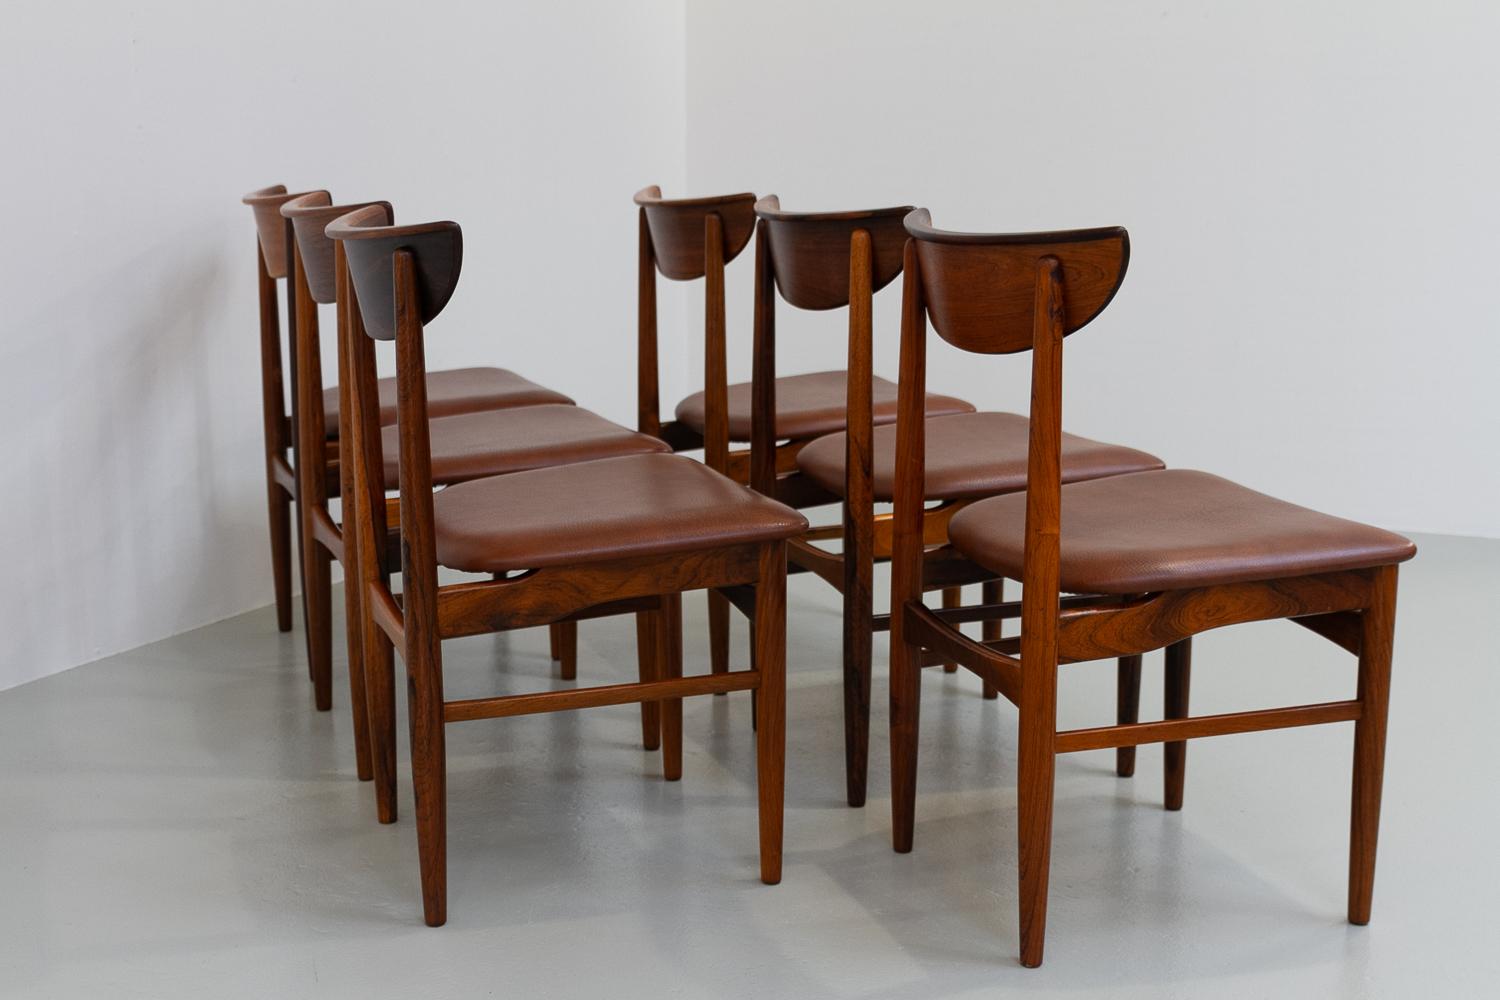 Vintage Danish Rosewood Dining Chairs by E.W. Bach for Skovby, 1960s. Set of 6. For Sale 1